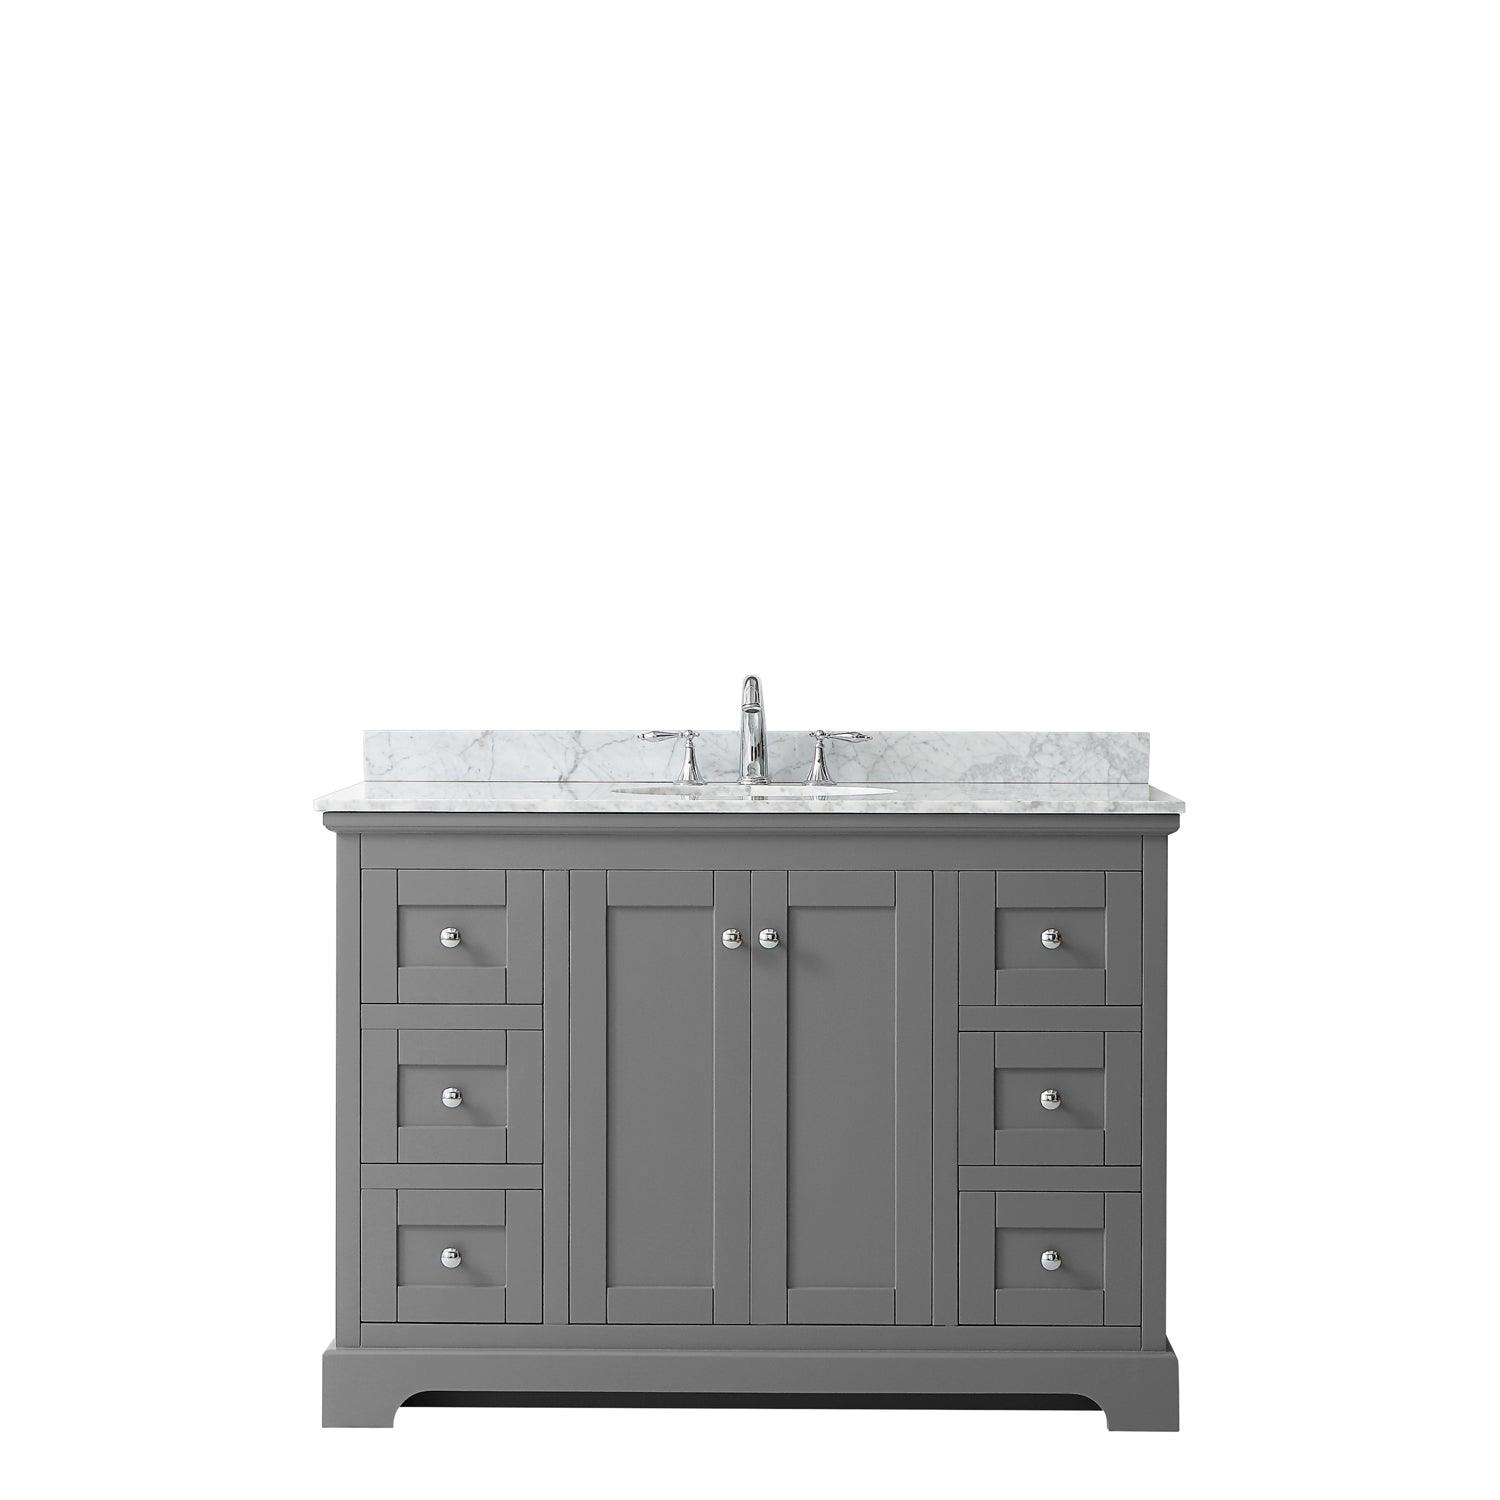 
  
  Wyndham Collection Avery Single Bathroom Vanity with White Carrara Marble Countertop, Undermount Oval Sink, Optional Mirror
  
